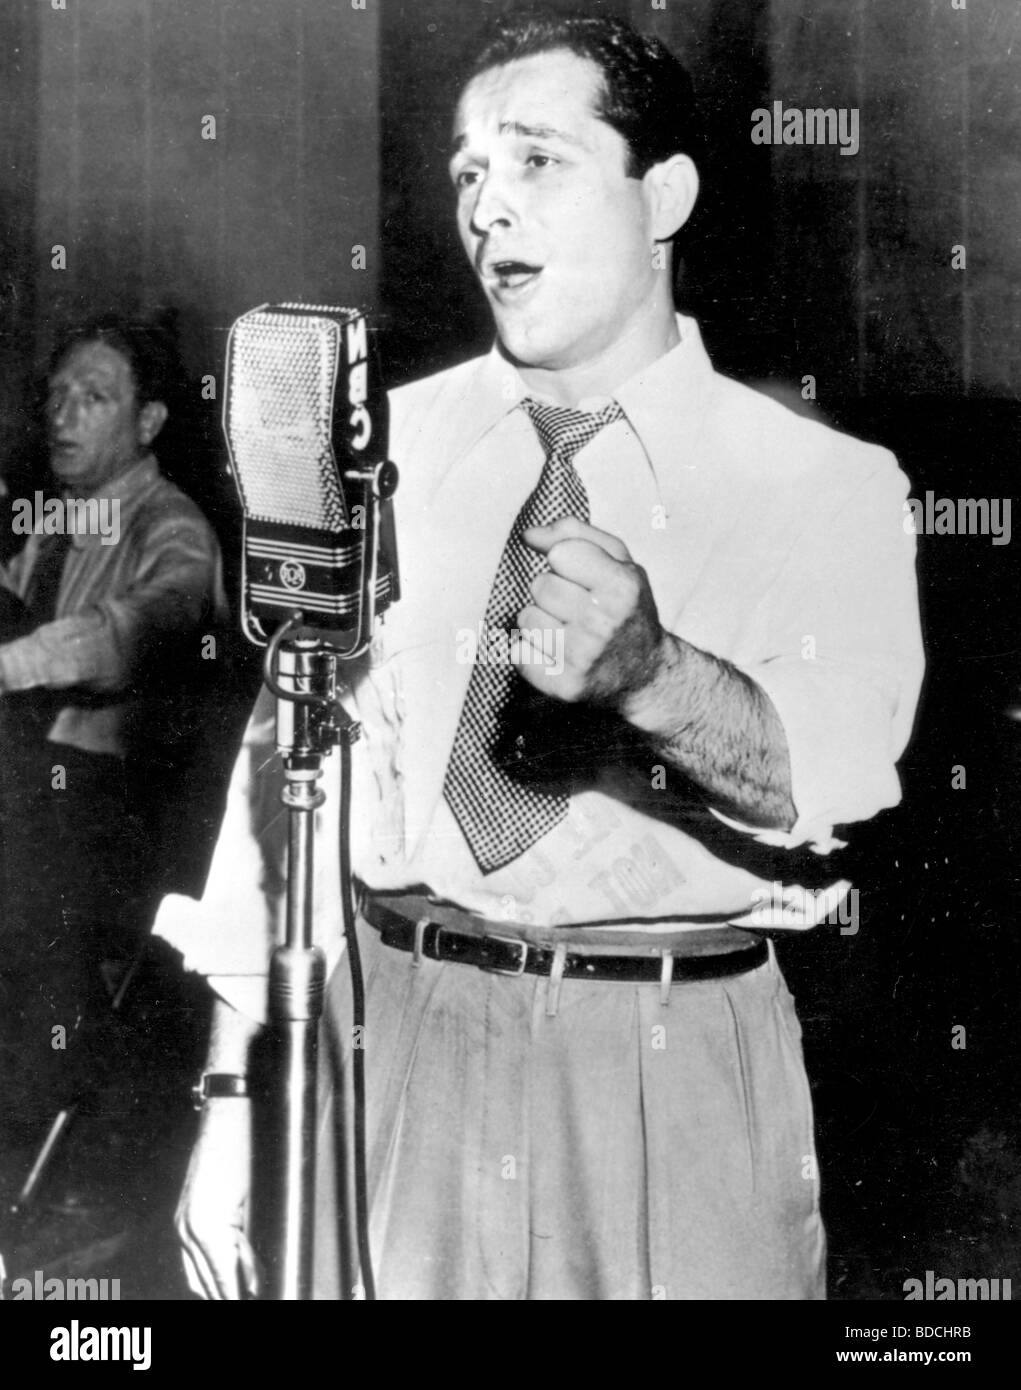 PERRY COMO - US singer on a live radio show about 1945 Stock Photo